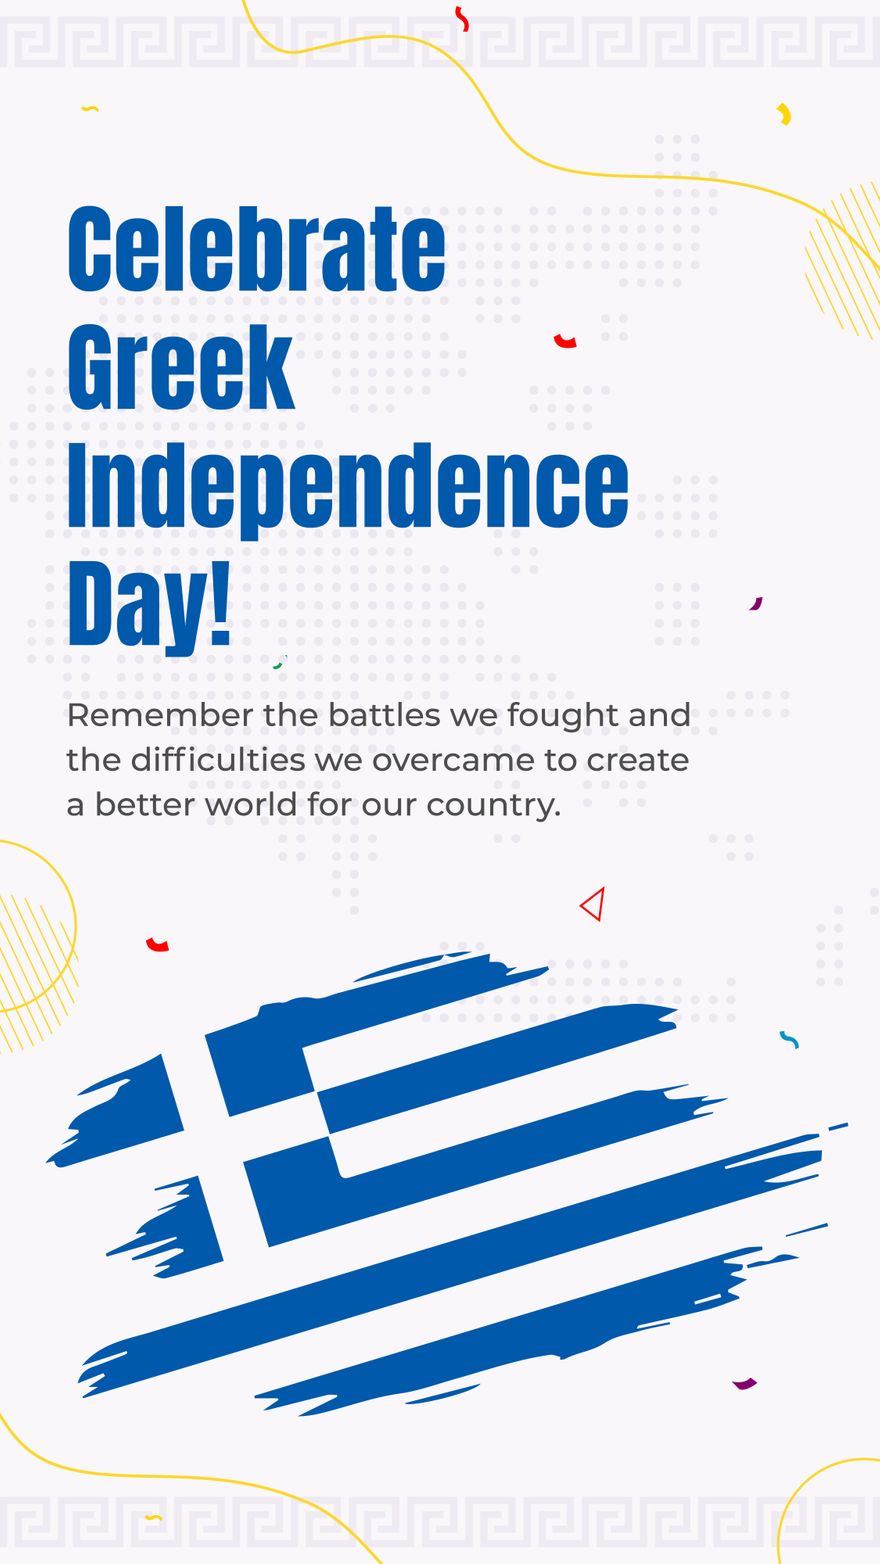 Greek Independence Day Whatsapp Status in Illustrator, PSD, EPS, SVG, JPG, PNG